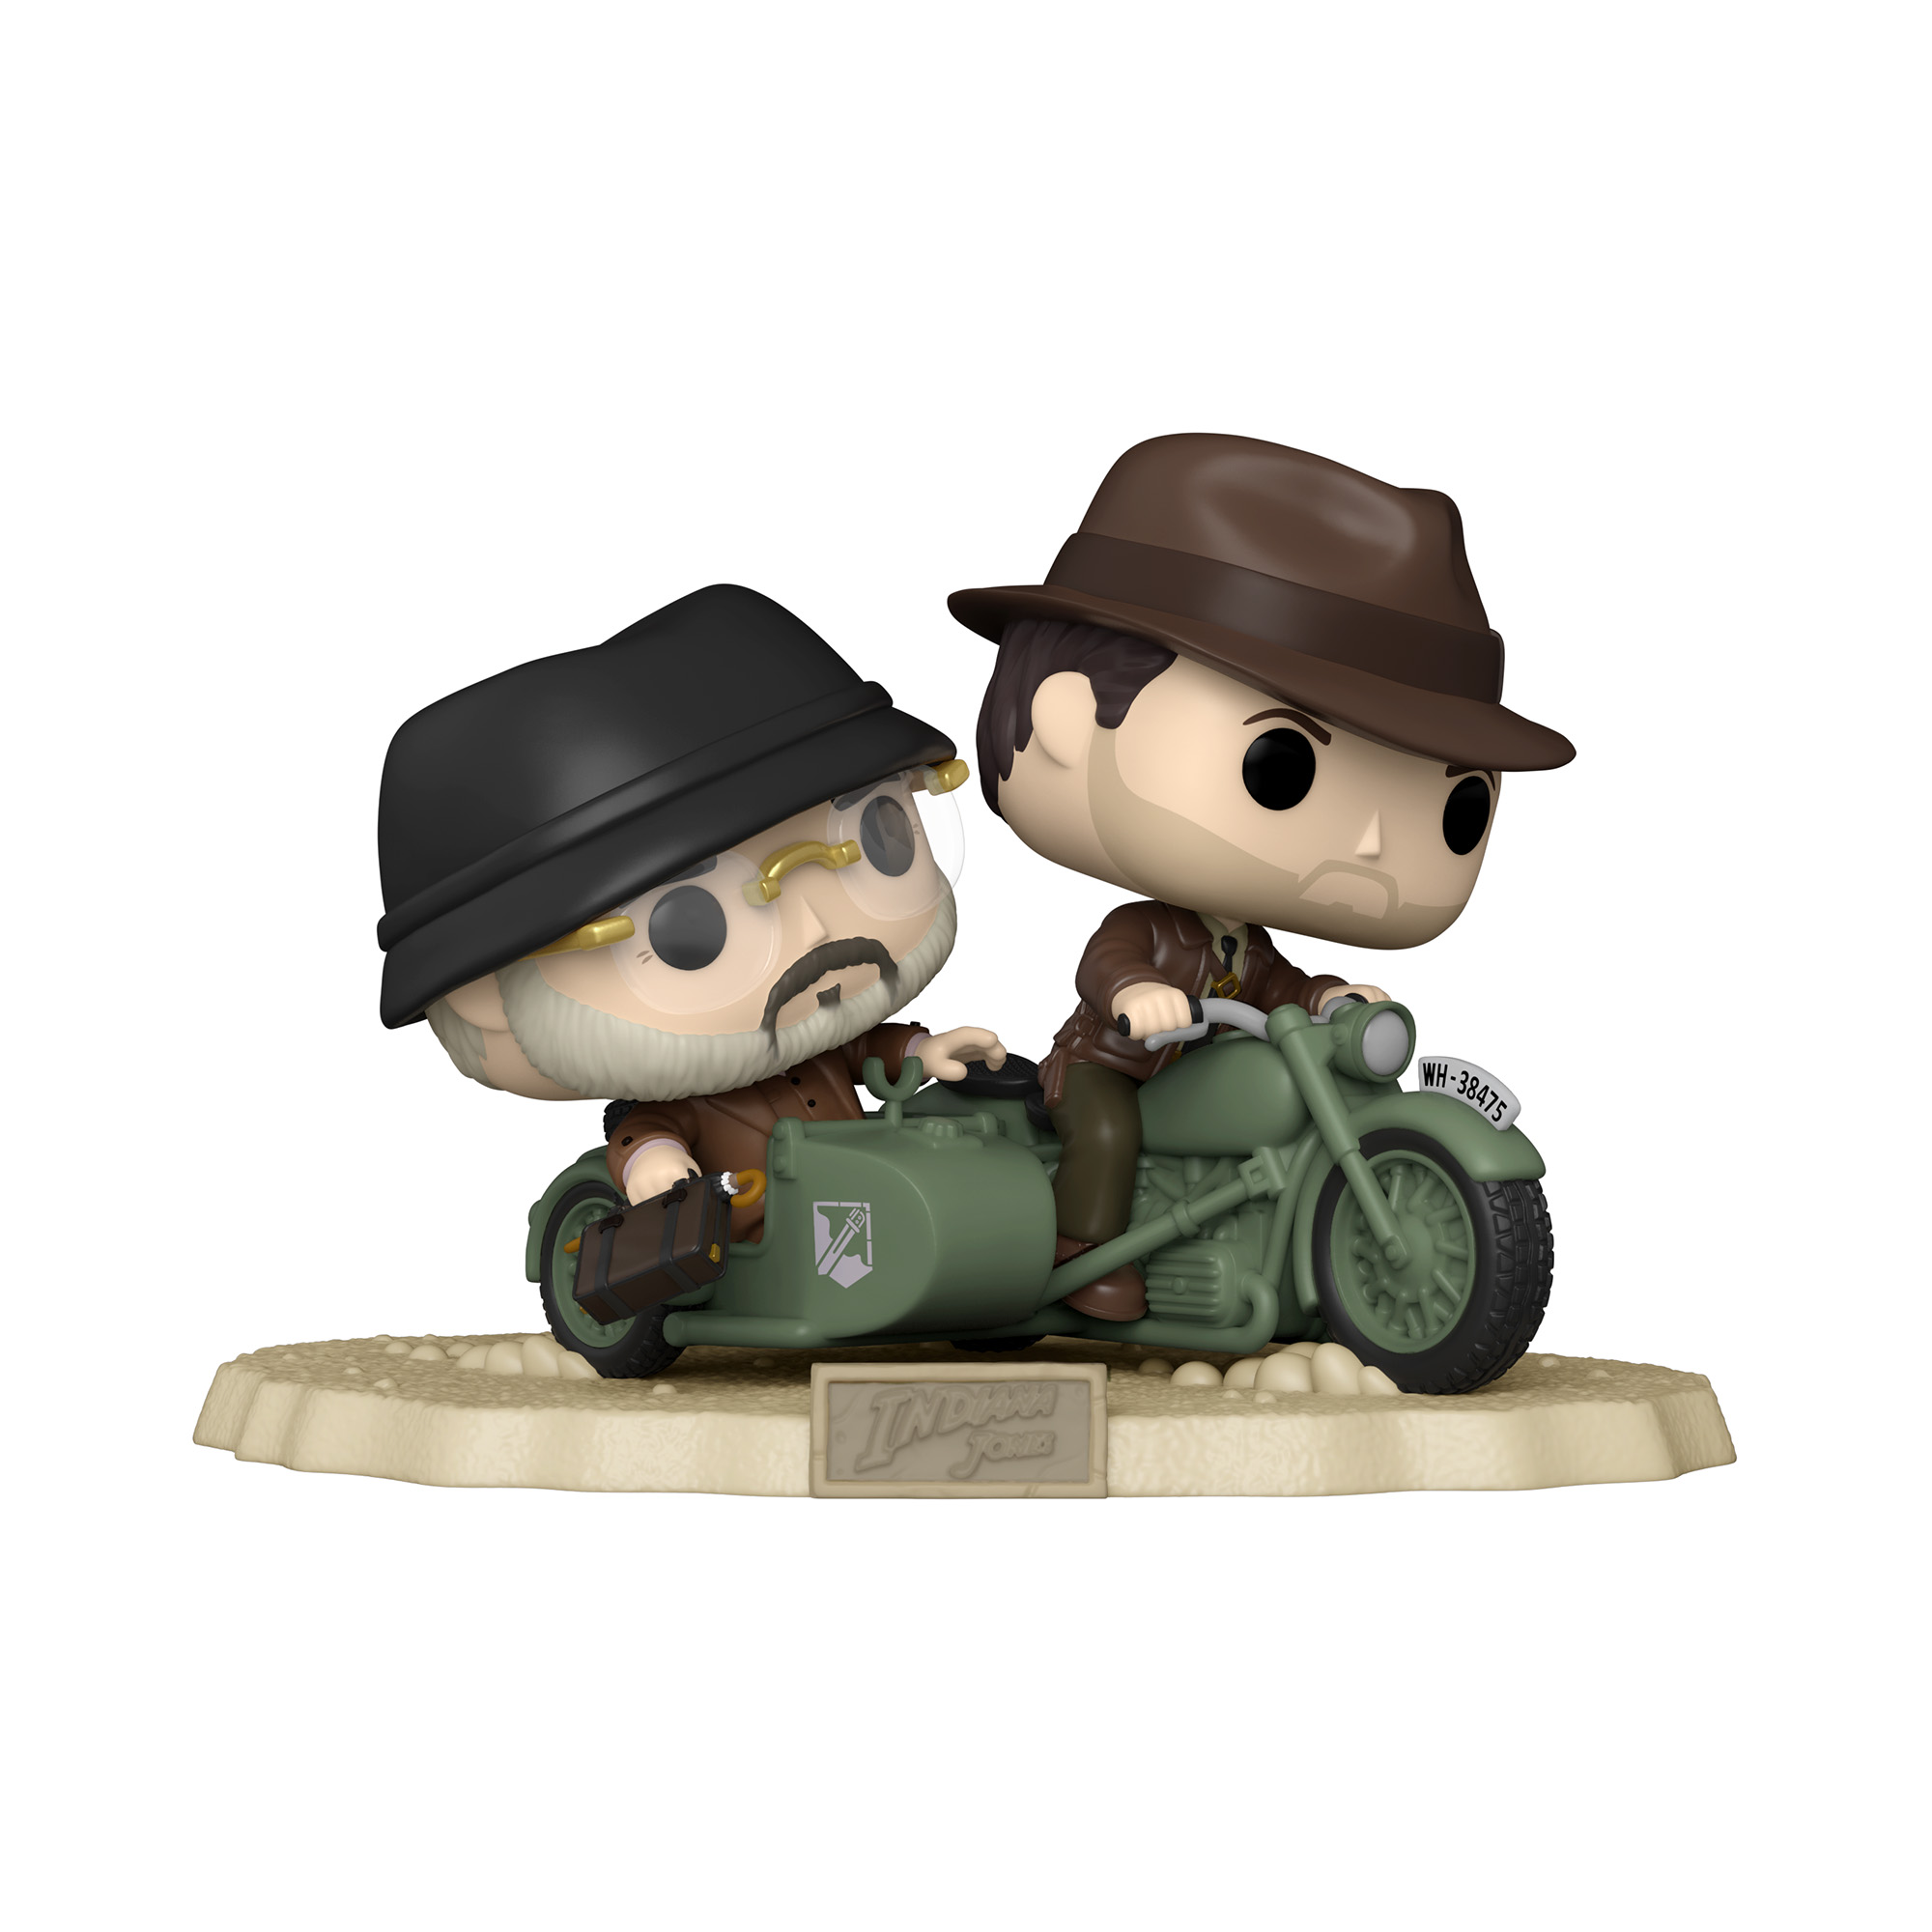 Pop Rides Super Deluxe Indiana Jones Motorcycle and Sidecar